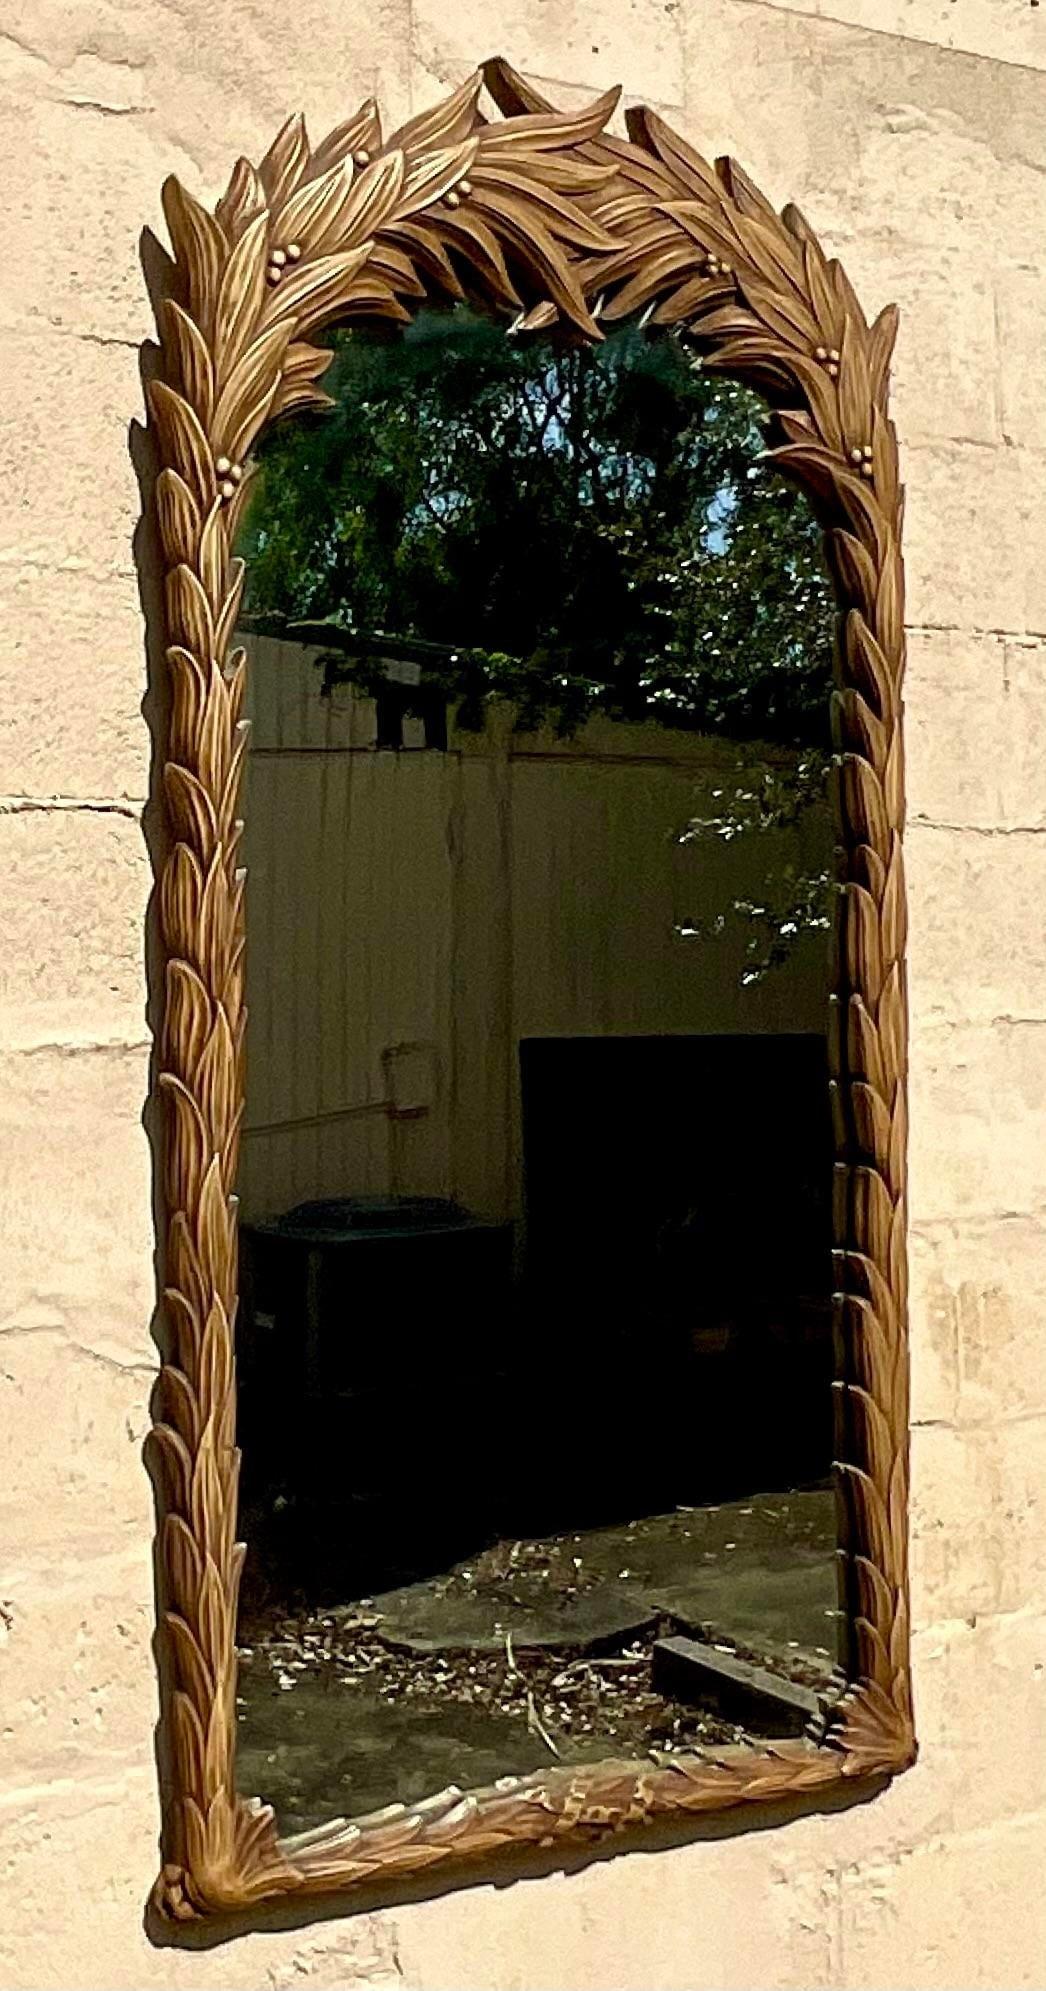 A vintage Boho molded wood mirror. The iconic Peacock Palm design in a glazed wood finish. Monumental in size and drama. Acquired from a Palm Beach estate. 